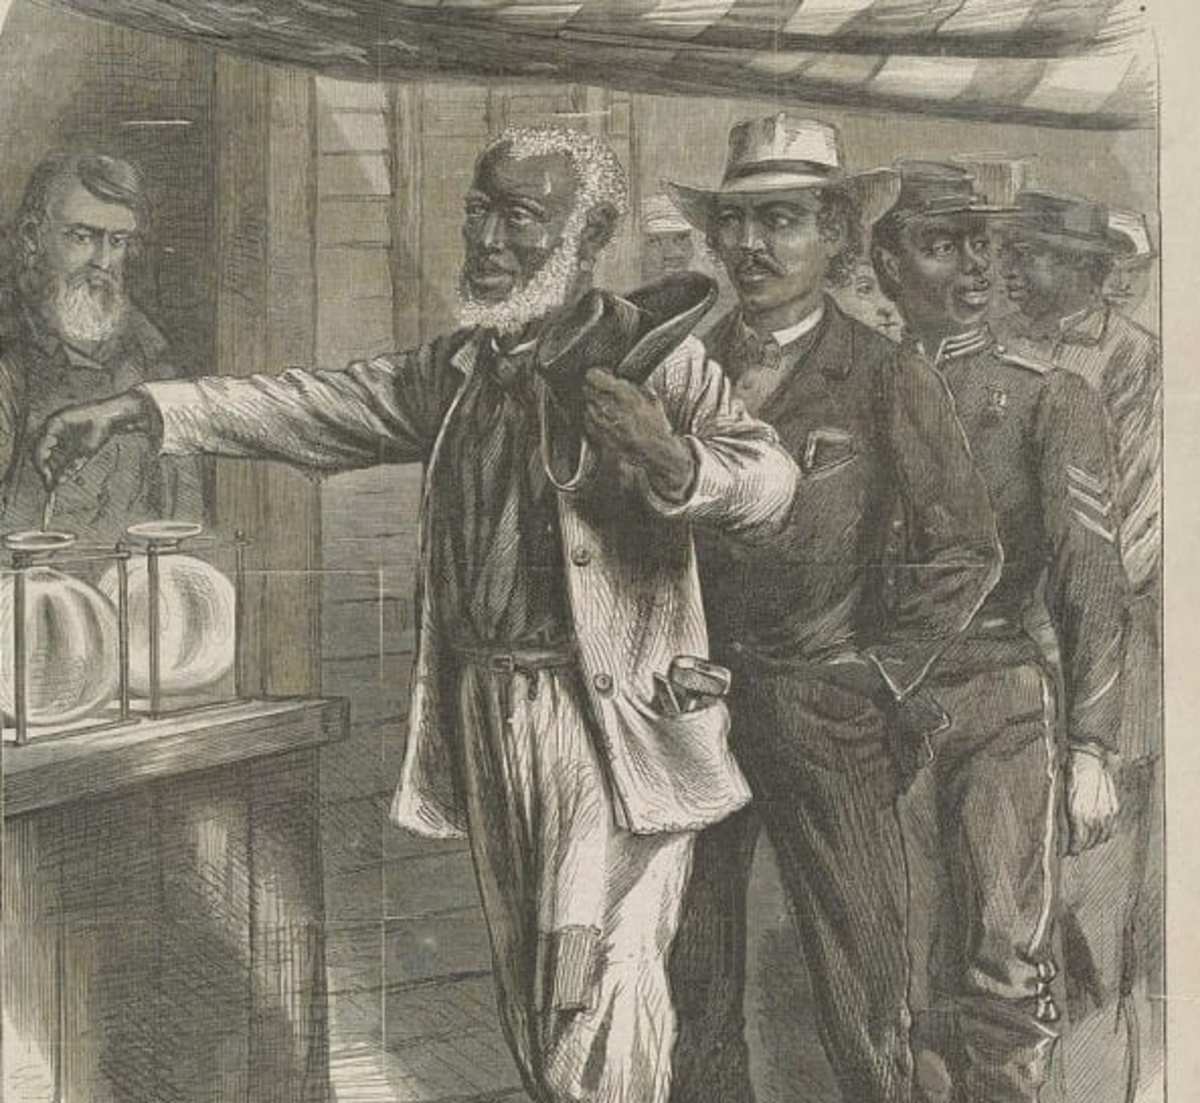 “The first vote” (Drawn by A.R. Waud/Library of Congress).